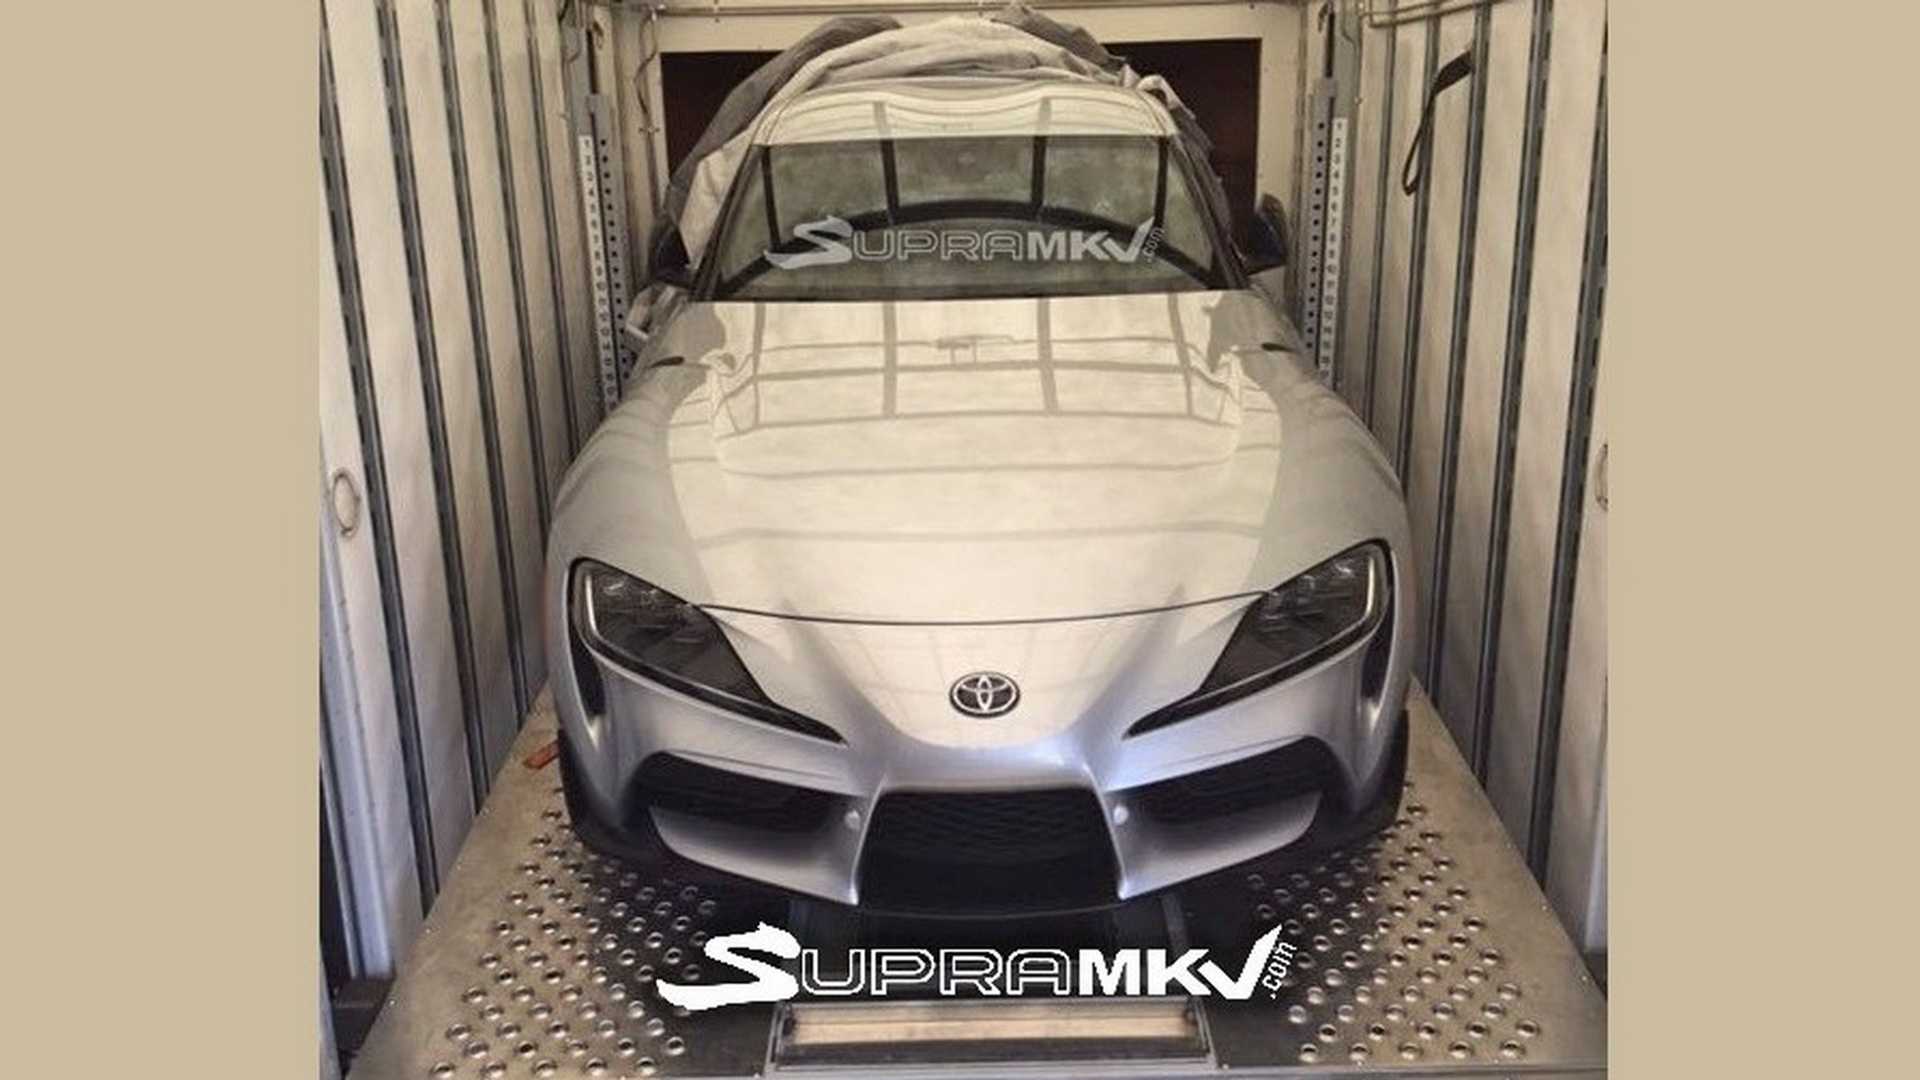 Toyota Supra Front Design Leaked In Revealing Spy Photo